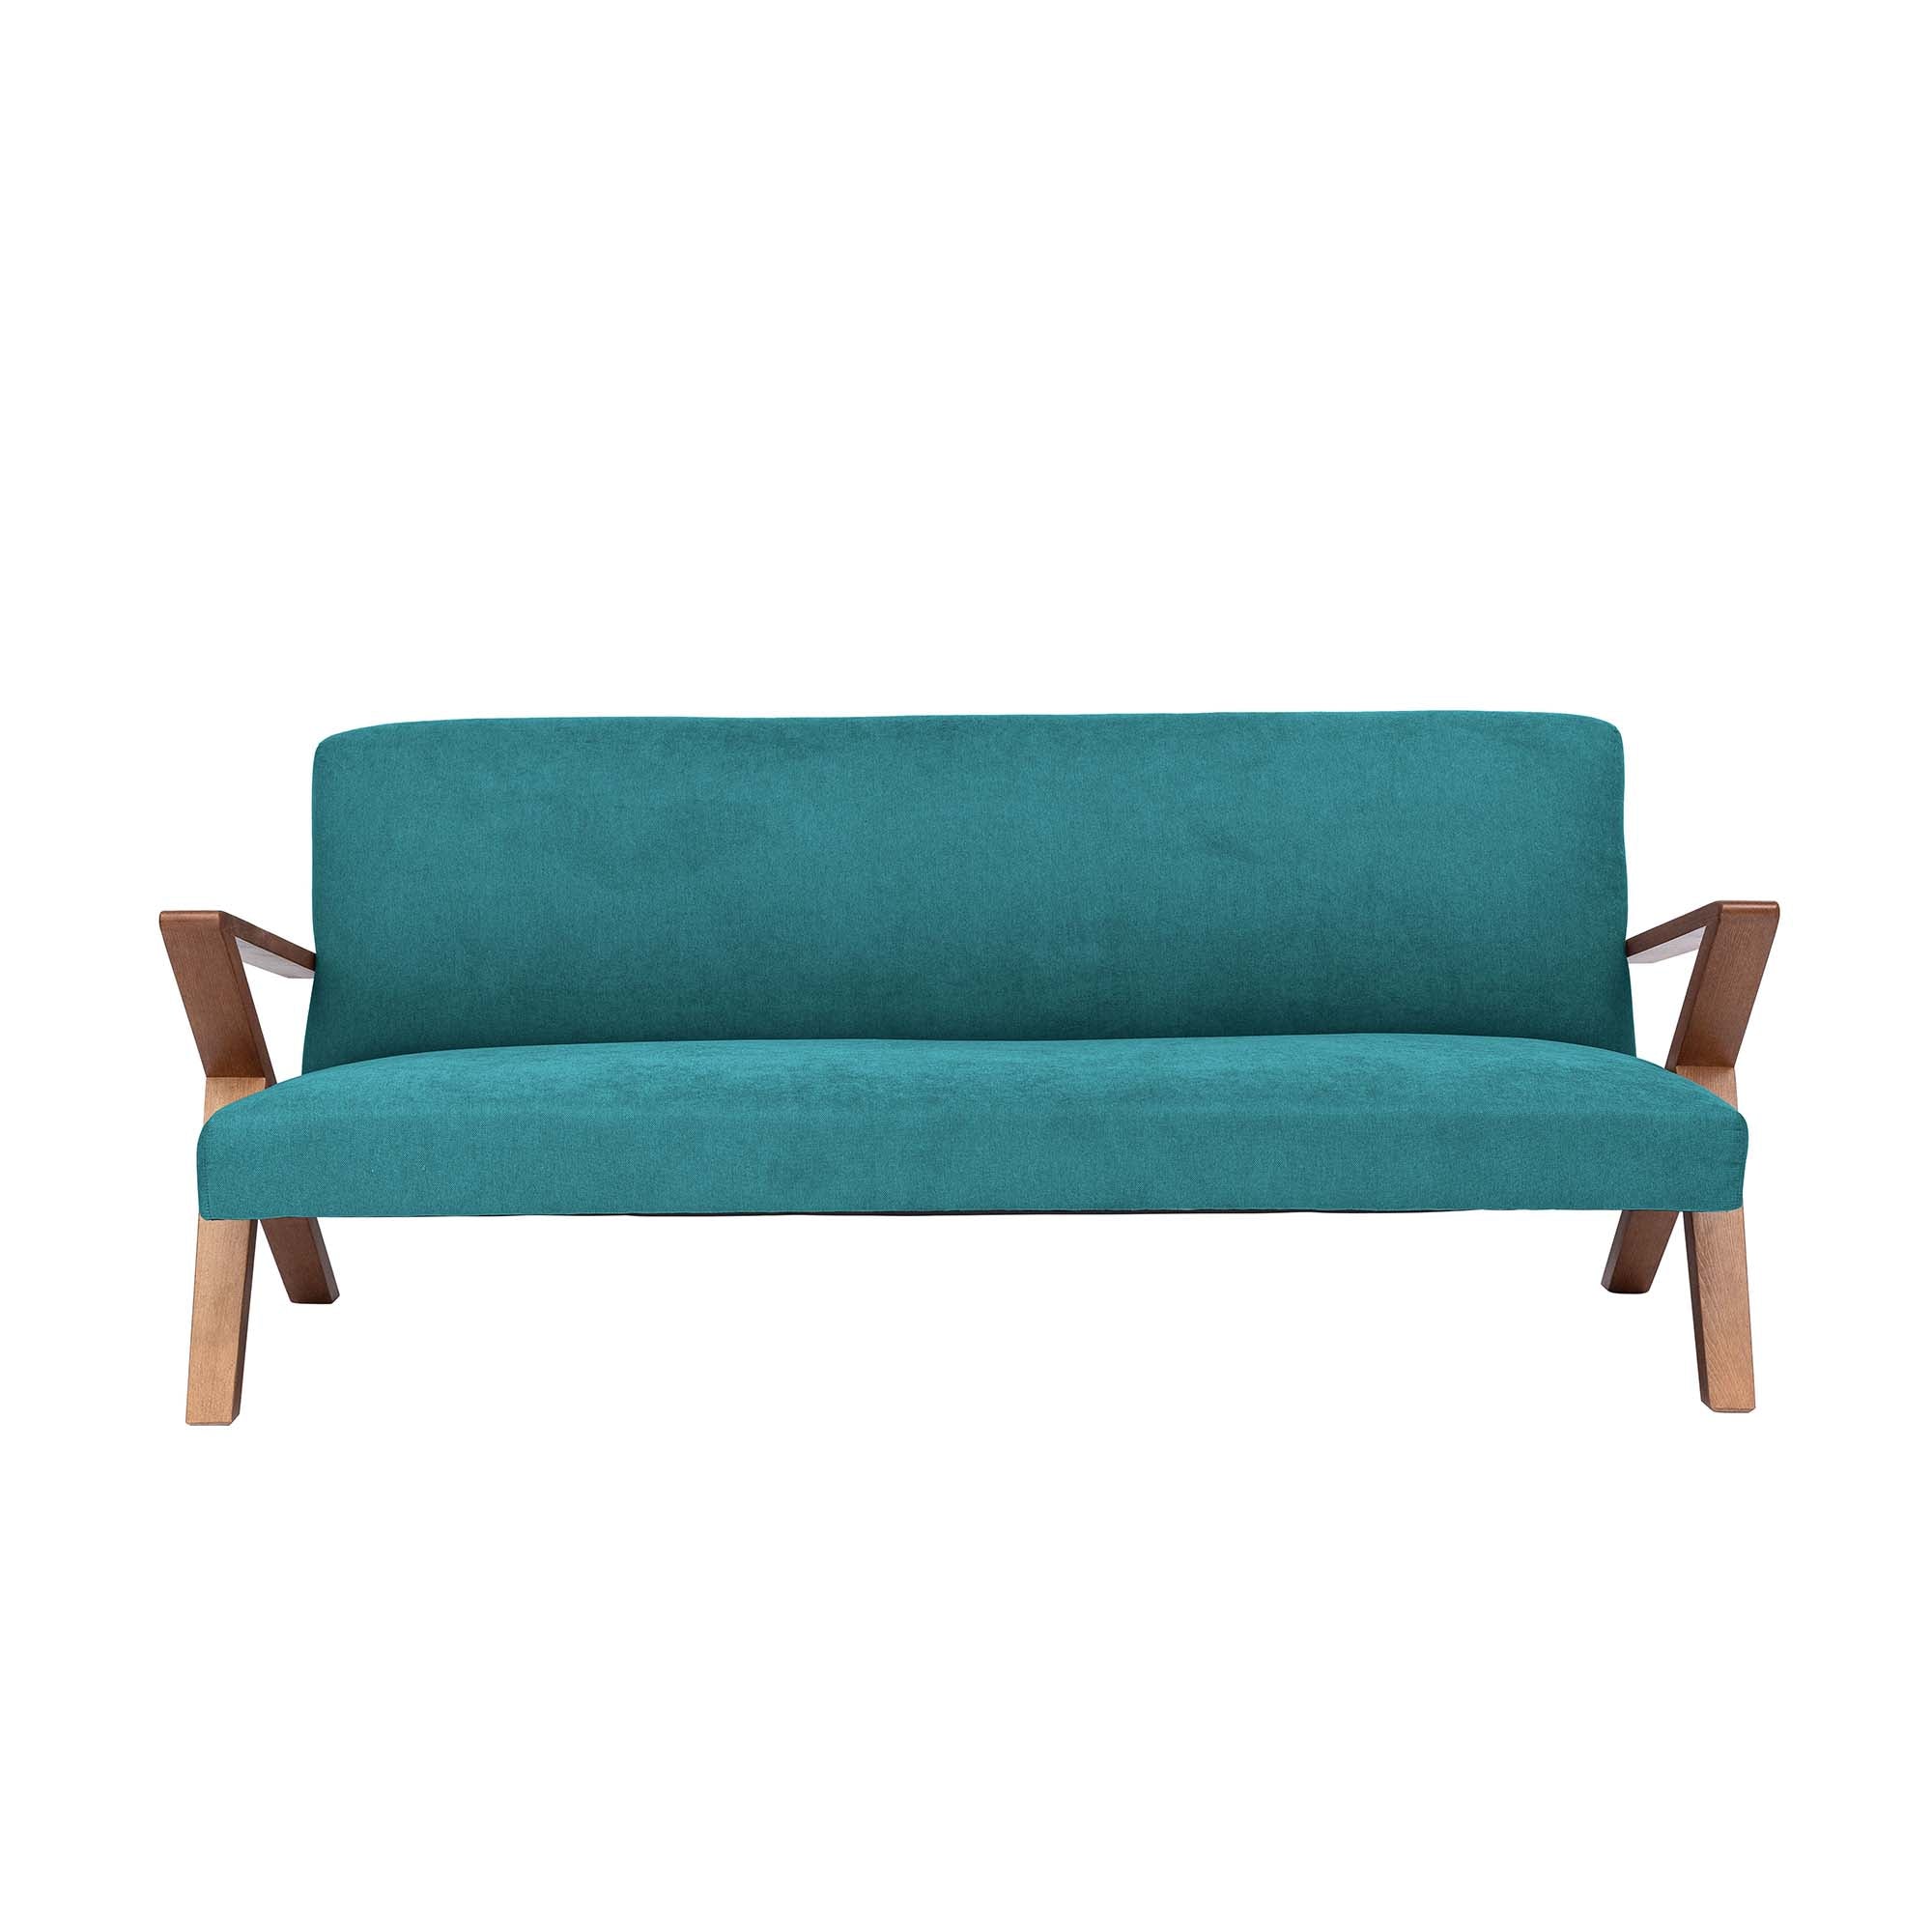  4-seater Sofa Beech Wood Frame, Walnut Colour blue fabric, front view